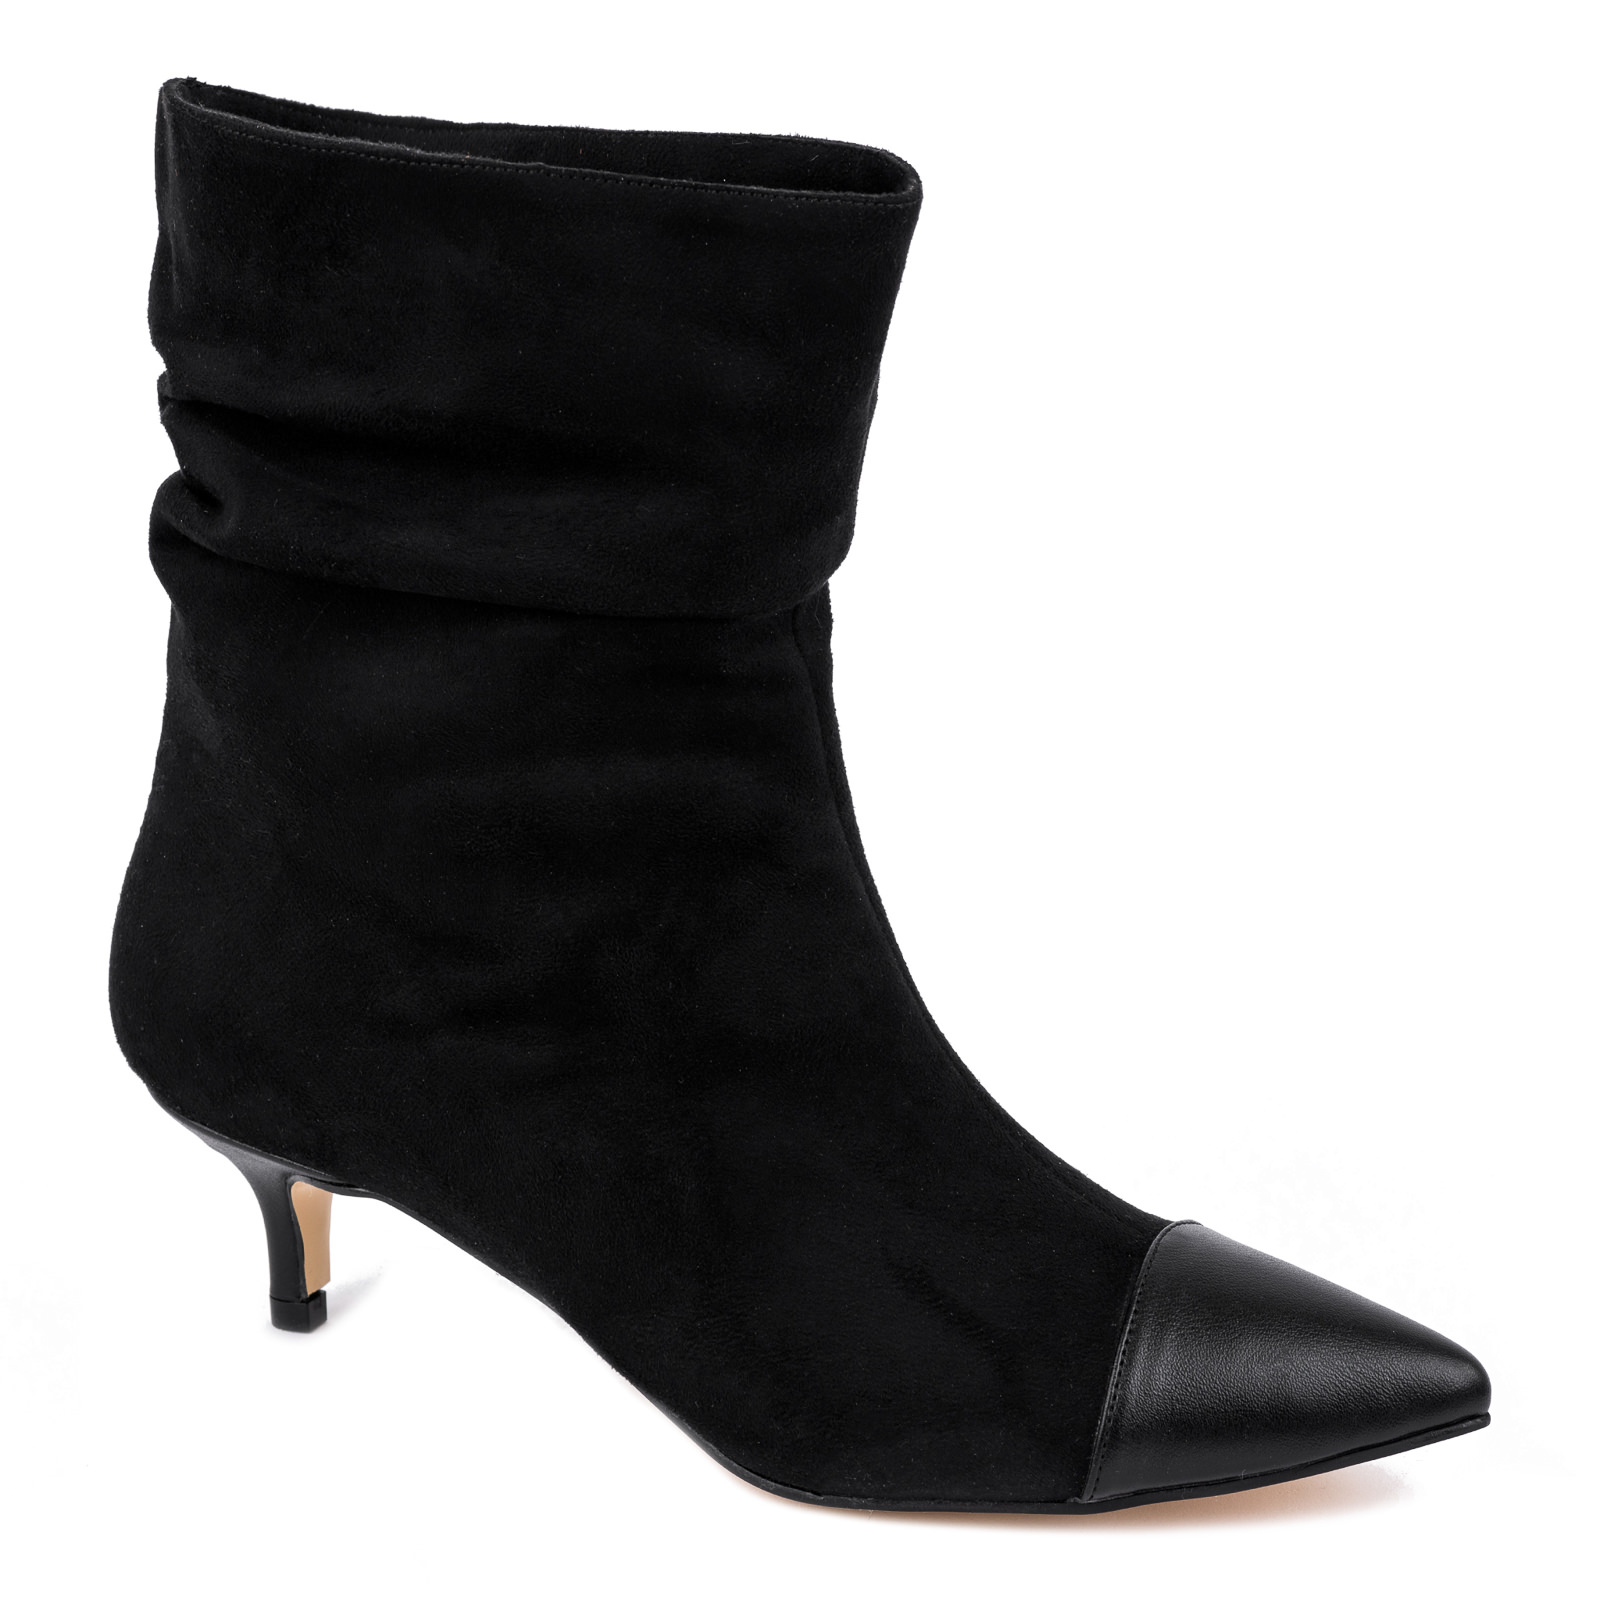 VELOUR POINTED WRINKLED ANKLE BOOTS WITH THIN HEEL - BLACK